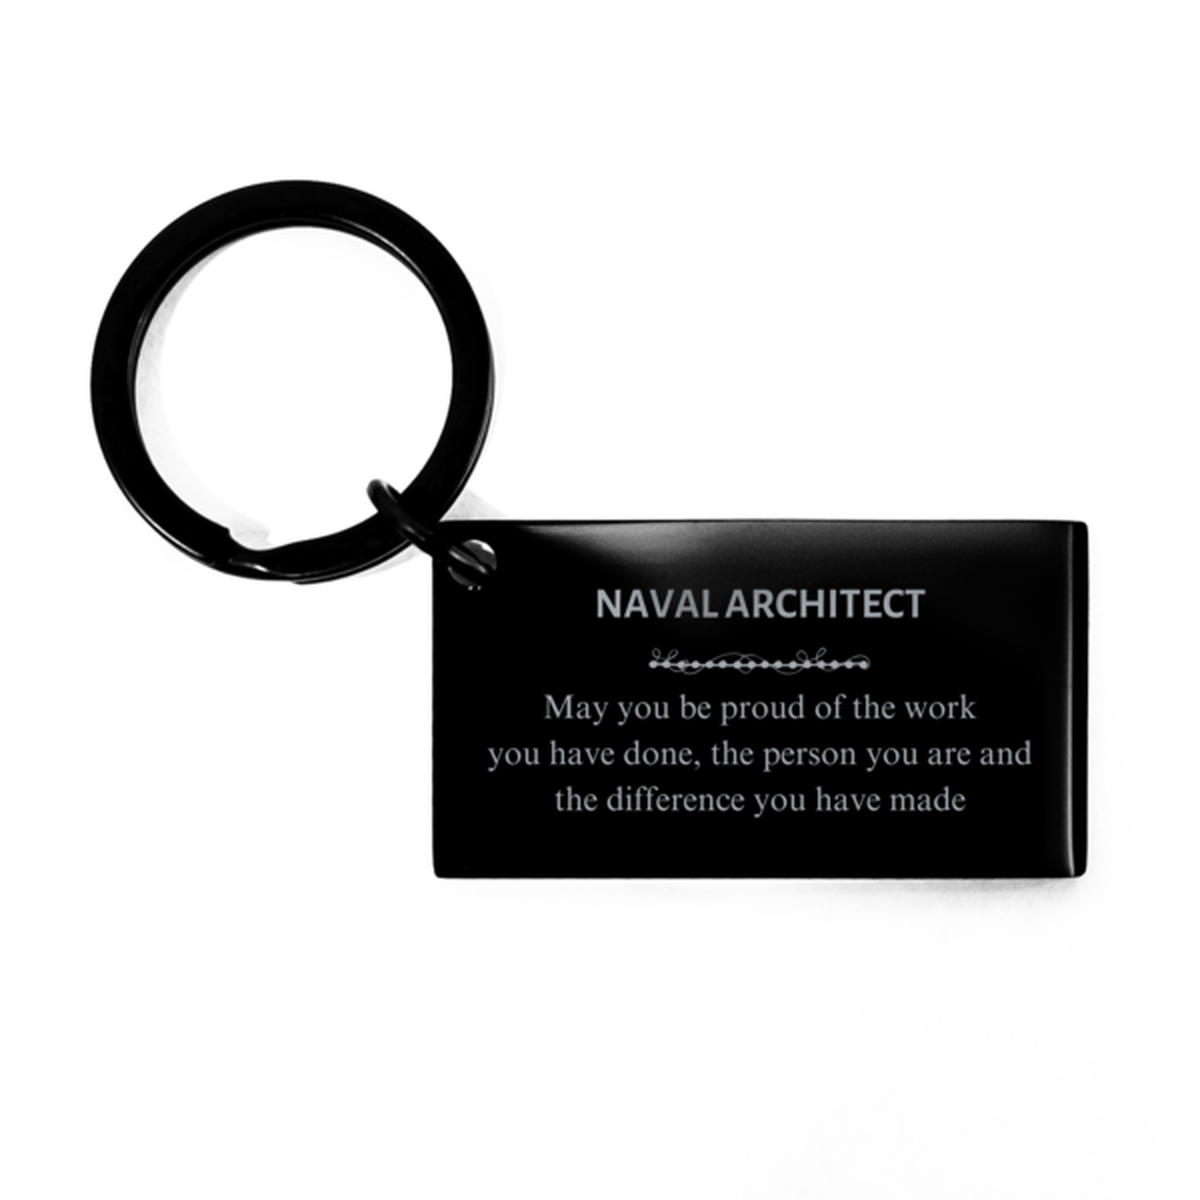 Payroll Clerk May you be proud of the work you have done, Retirement Naval Architect Keychain for Colleague Appreciation Gifts Amazing for Naval Architect